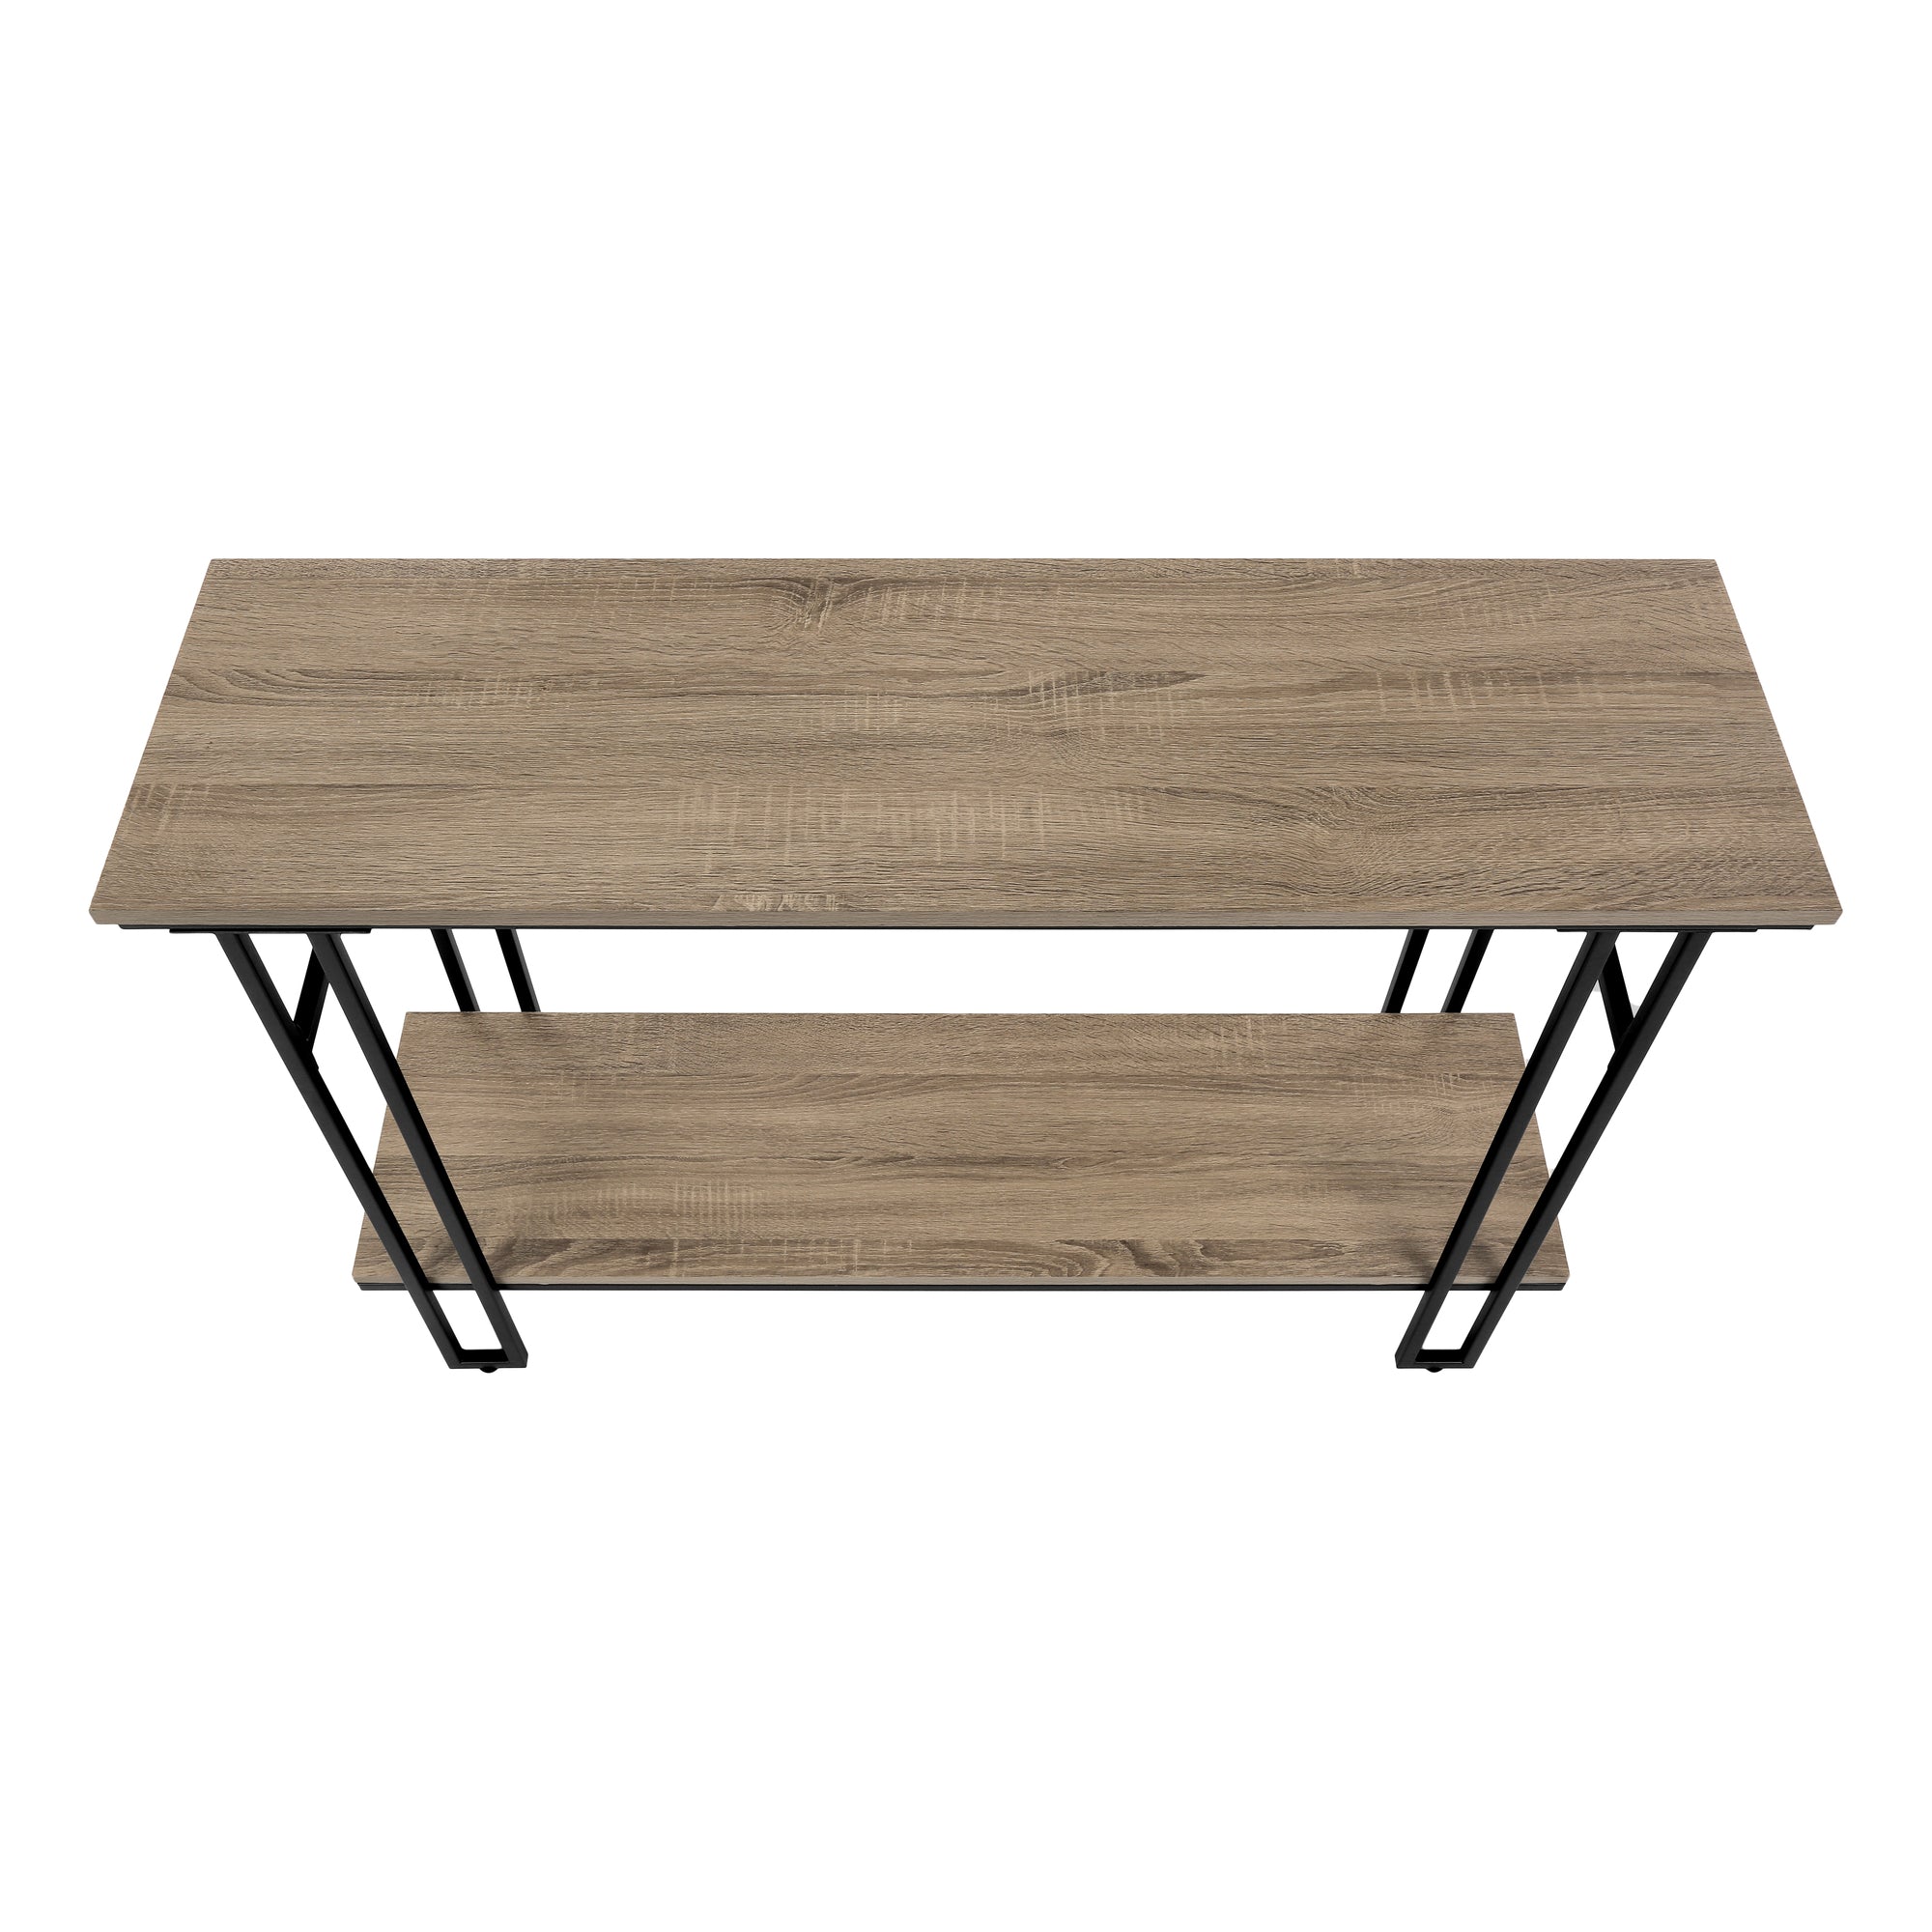 MN-403577    Accent Table, Console, Entryway, Narrow, Sofa, Living Room, Bedroom, Metal Frame, Laminate, Dark Taupe, Black, Contemporary, Modern